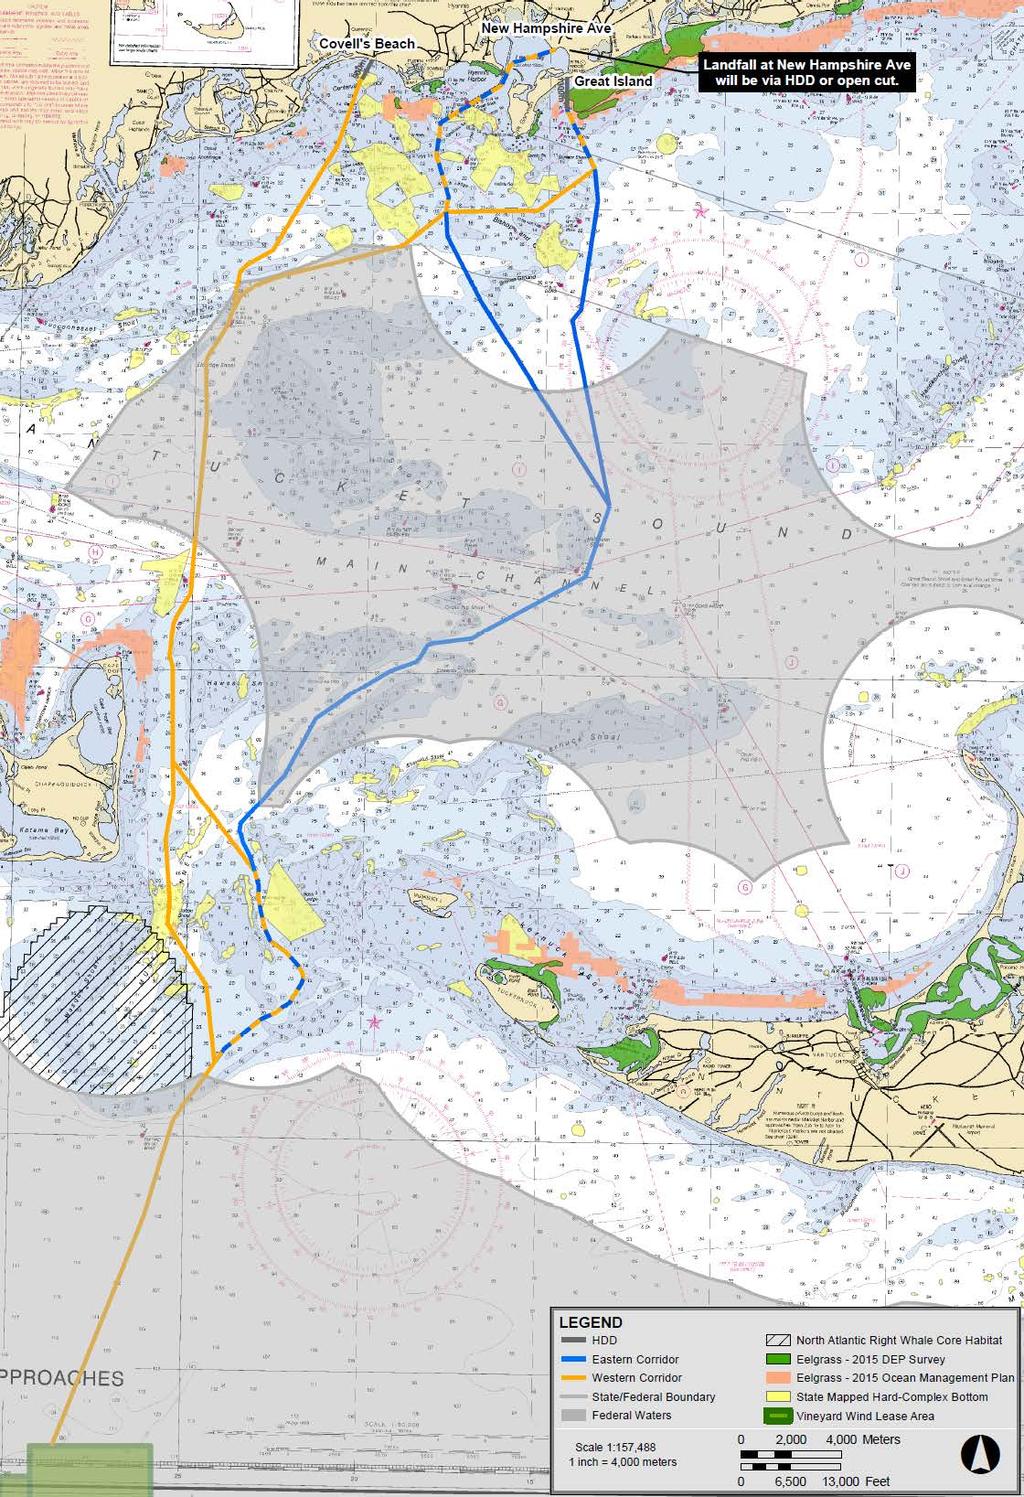 Proposed Offshore Cable Corridors 2 possible corridors: Western & Eastern (only 1 will be used) Multiple options through Muskeget Channel August/September 2017 surveys, more in 2018 Routing